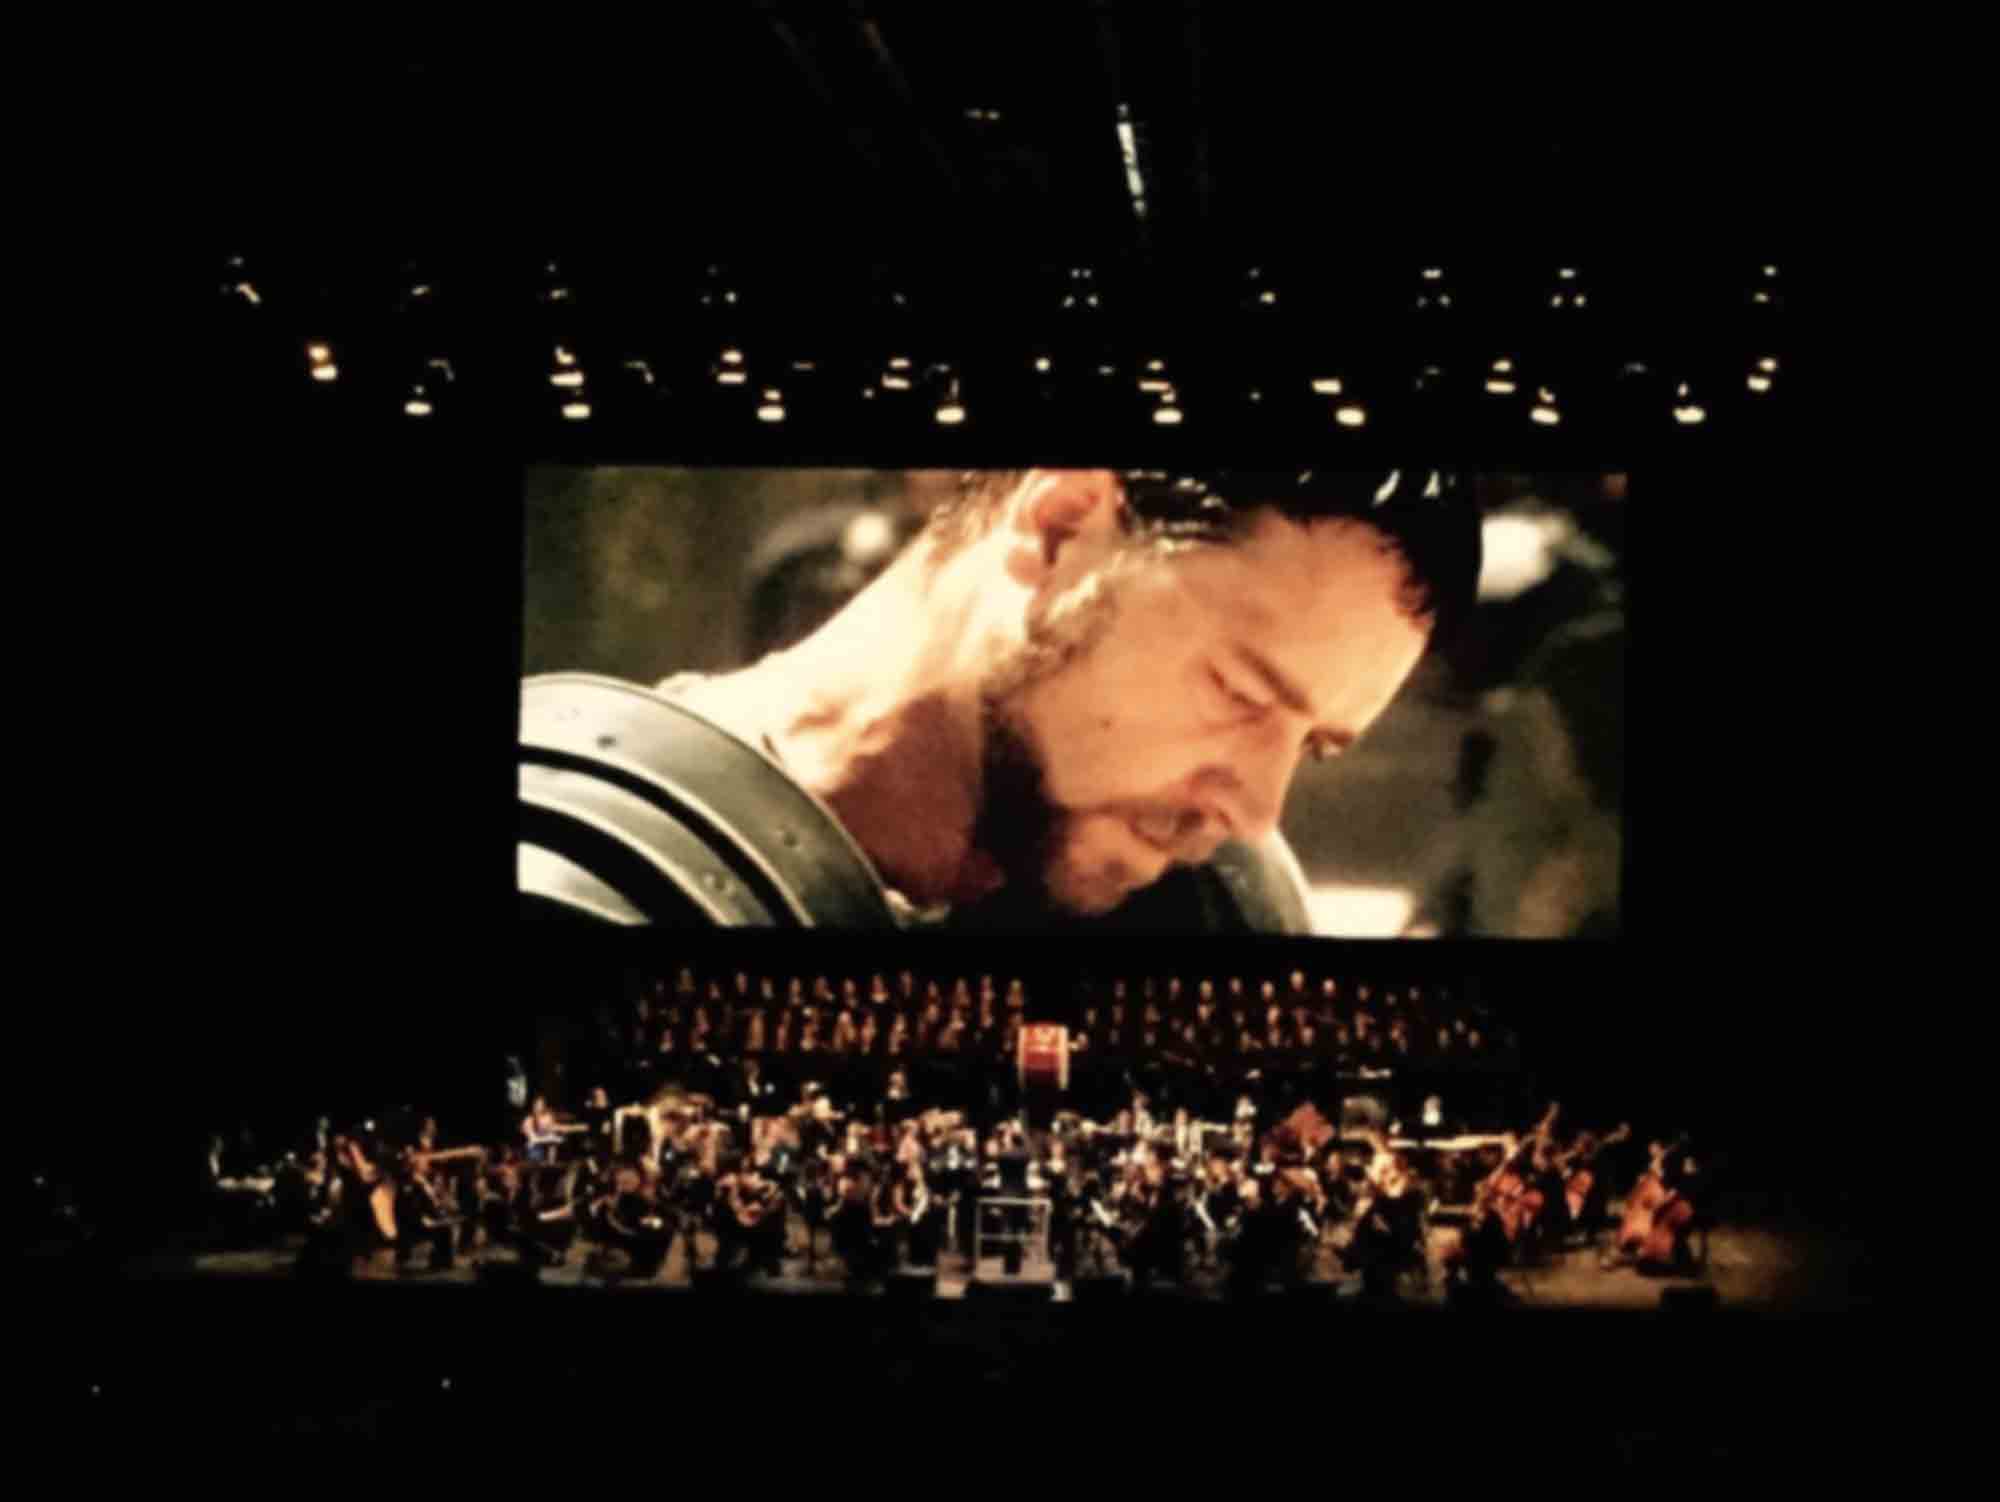 The KCB Choir performs the original soundtrack from the film ‘Gladiator’ (2000). live to projection at Brussels Expo, Palais 12, December 2014.